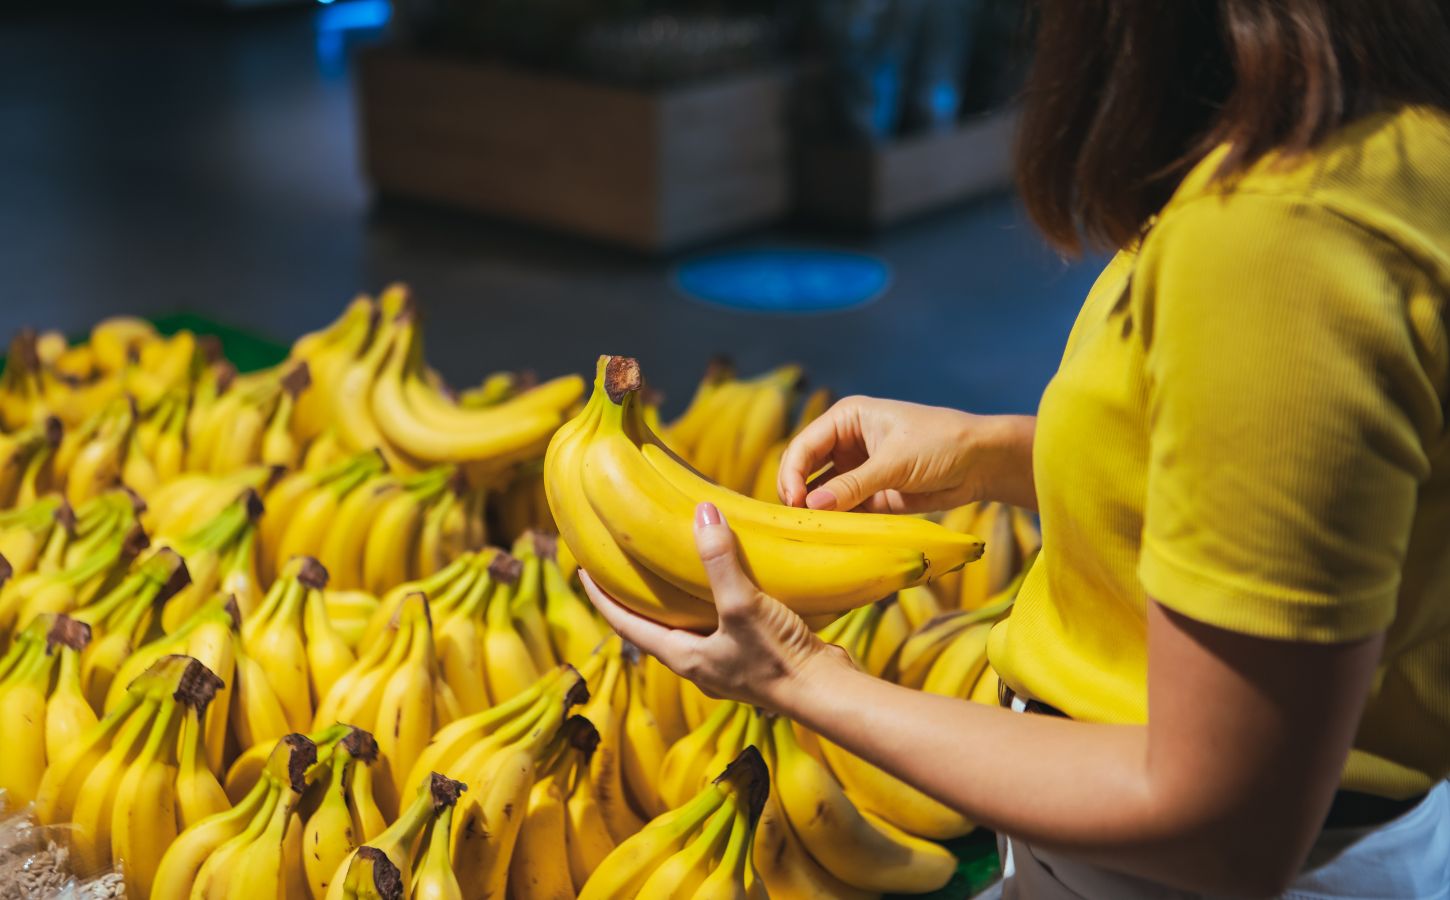 Photo shows a woman in a yellow shirt picking up a bunch of bananas from a large display case full of the same in a grocery store